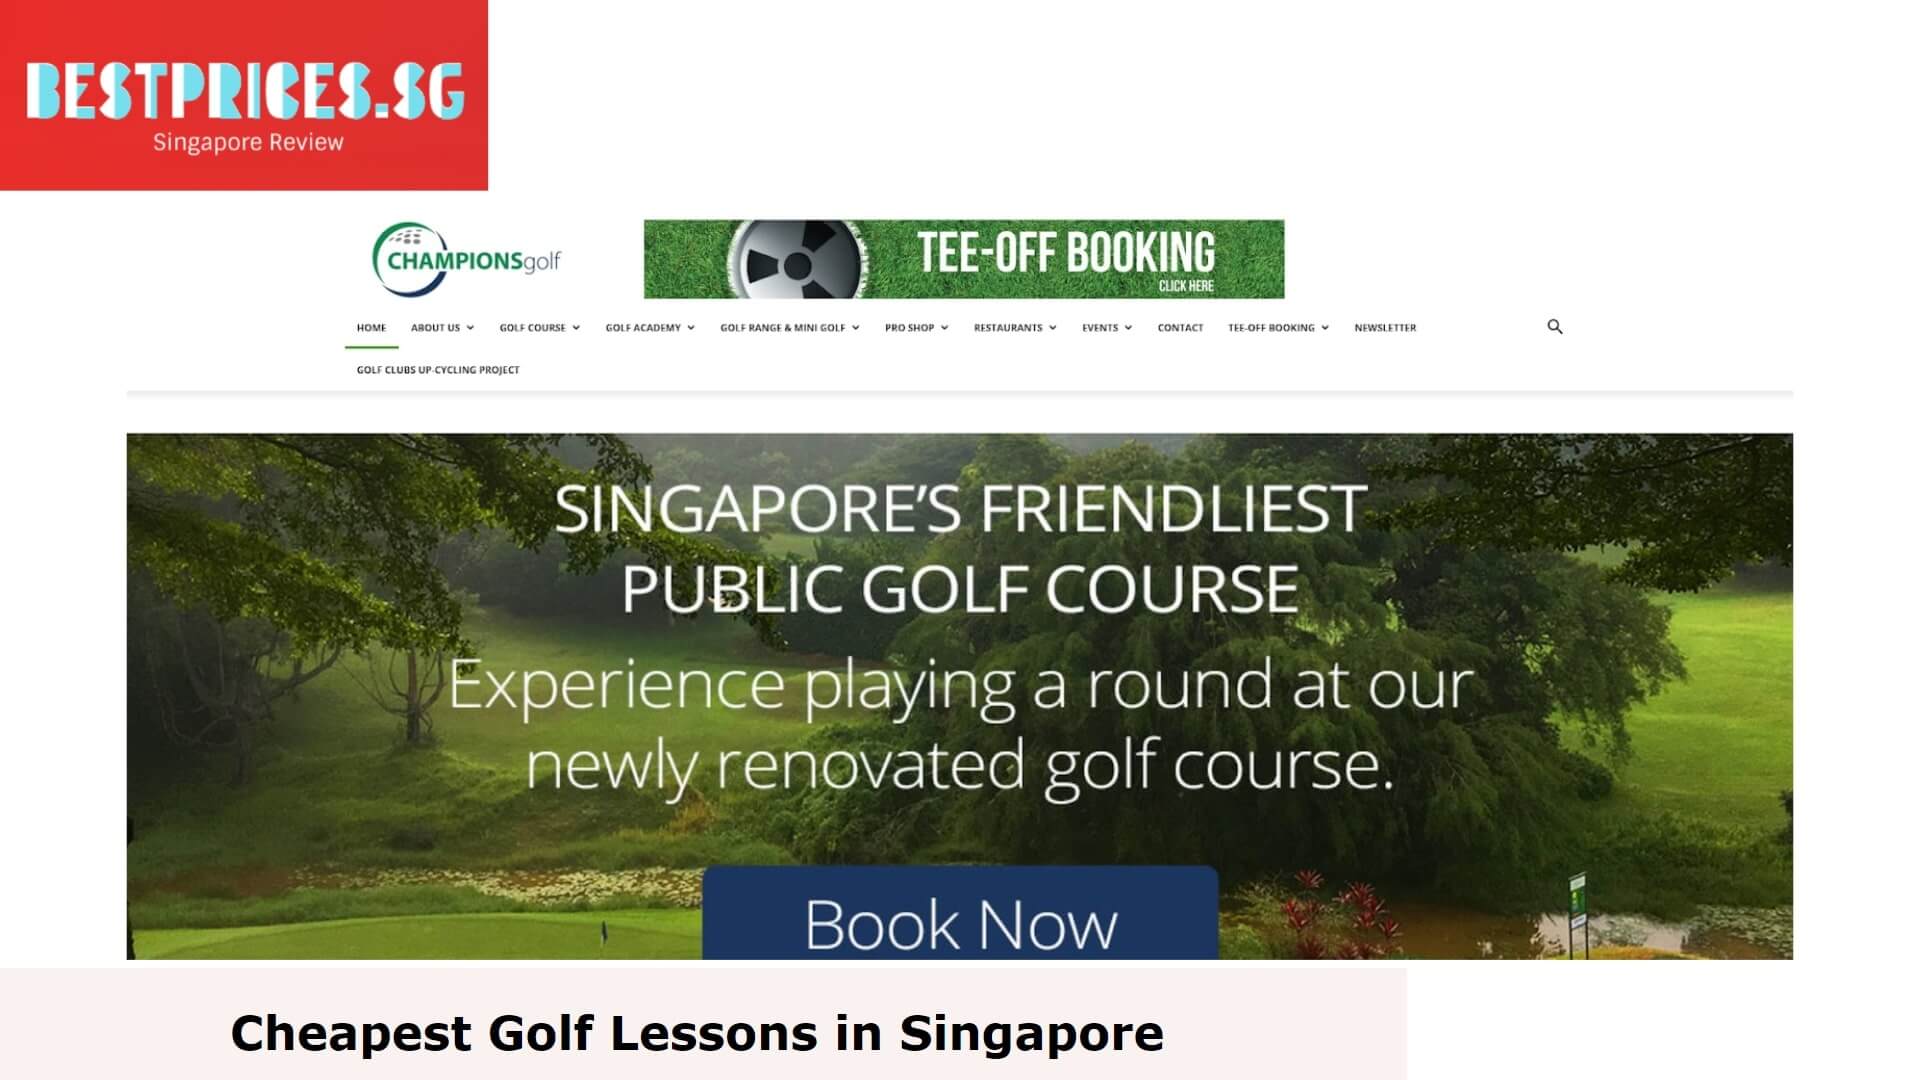 Champion Golf - Cheapest Golf Lessons Singapore, cheap golf lessons singapore, cheap golf classes singapore, How much is a golf lesson in Singapore?, Where can I play golf cheap in Singapore?, How much should I spend on golf lessons?, How much is it to learn golf in Singapore?, golf lessons package, golf lessons in singapore, golf lessons singapore price, affordable golf lessons, best golf lessons in singapore, golf lessons singapore beginners, female golf coach singapore, bukit batok golf lessons, 